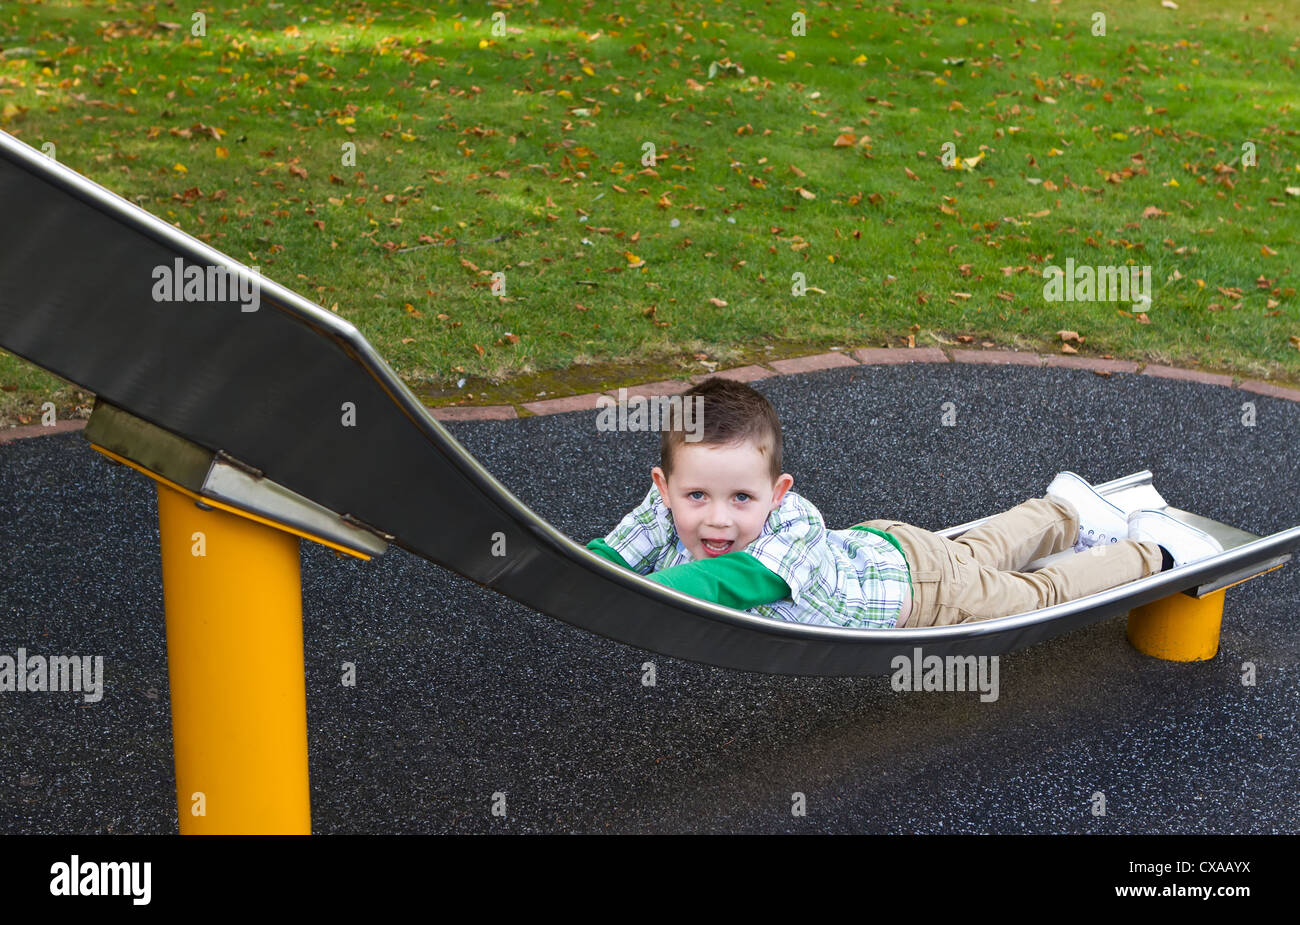 Young boy playing in the park on an overcast day Stock Photo